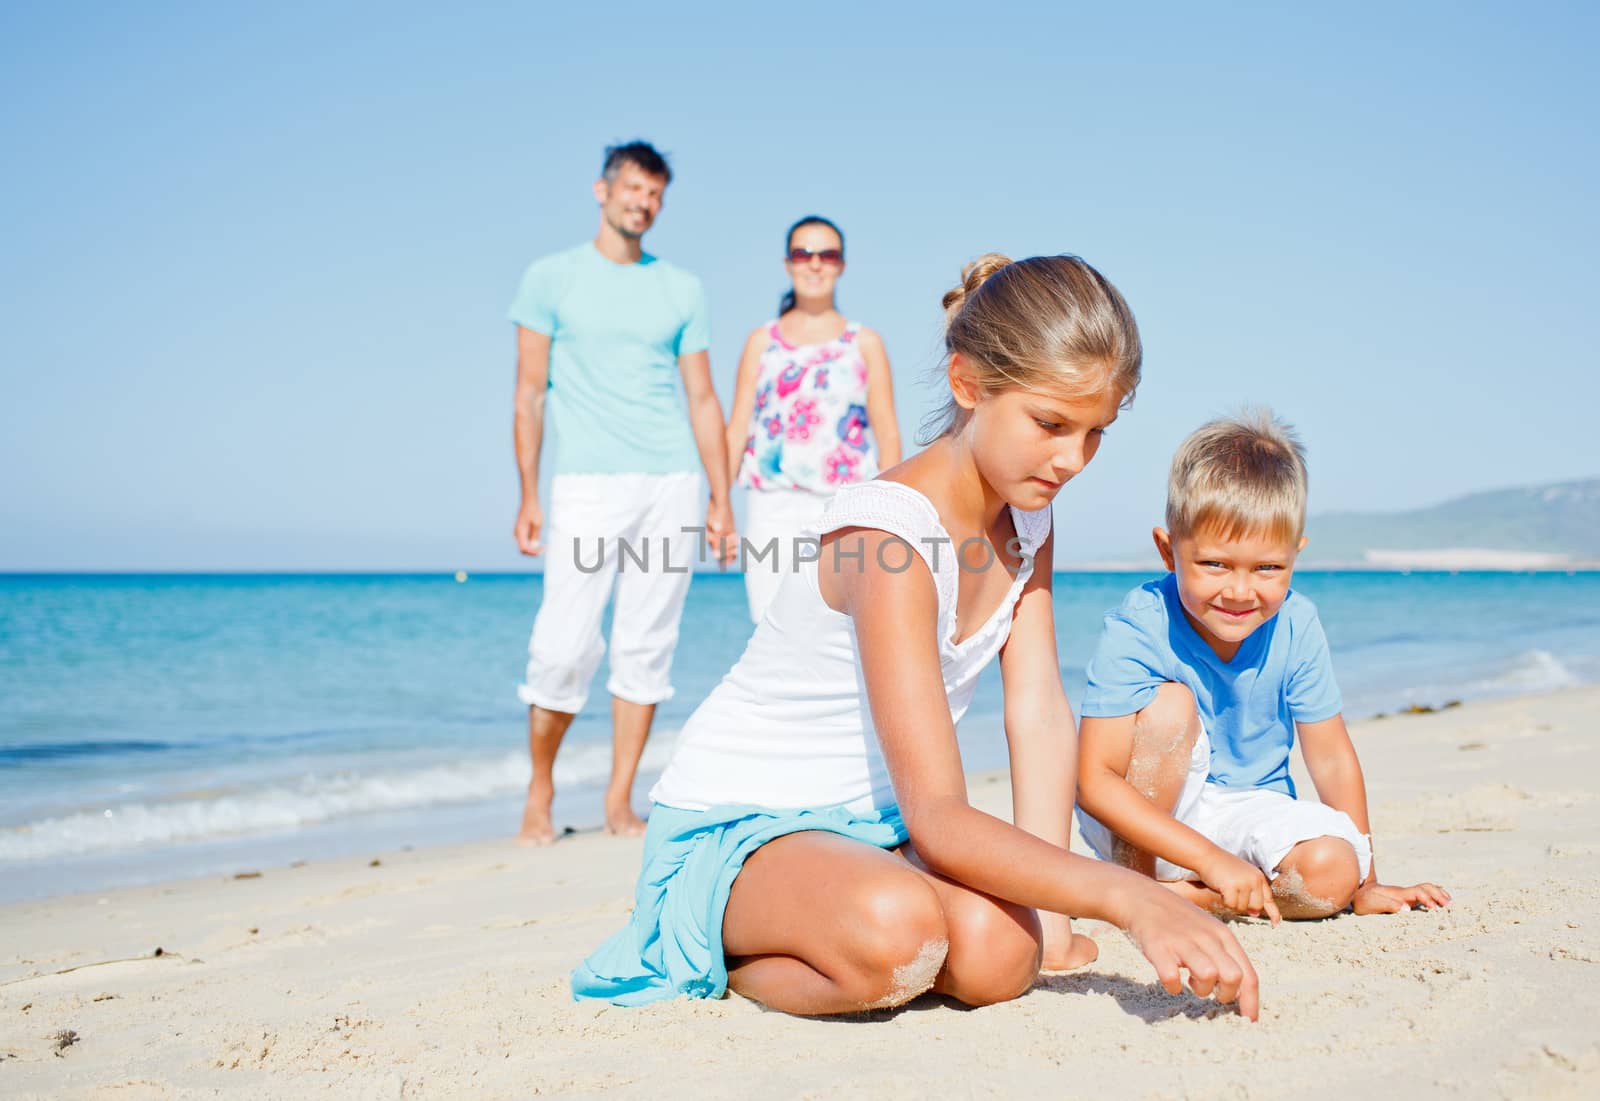 Family of four having fun on tropical beach - two cute kids playing with sand